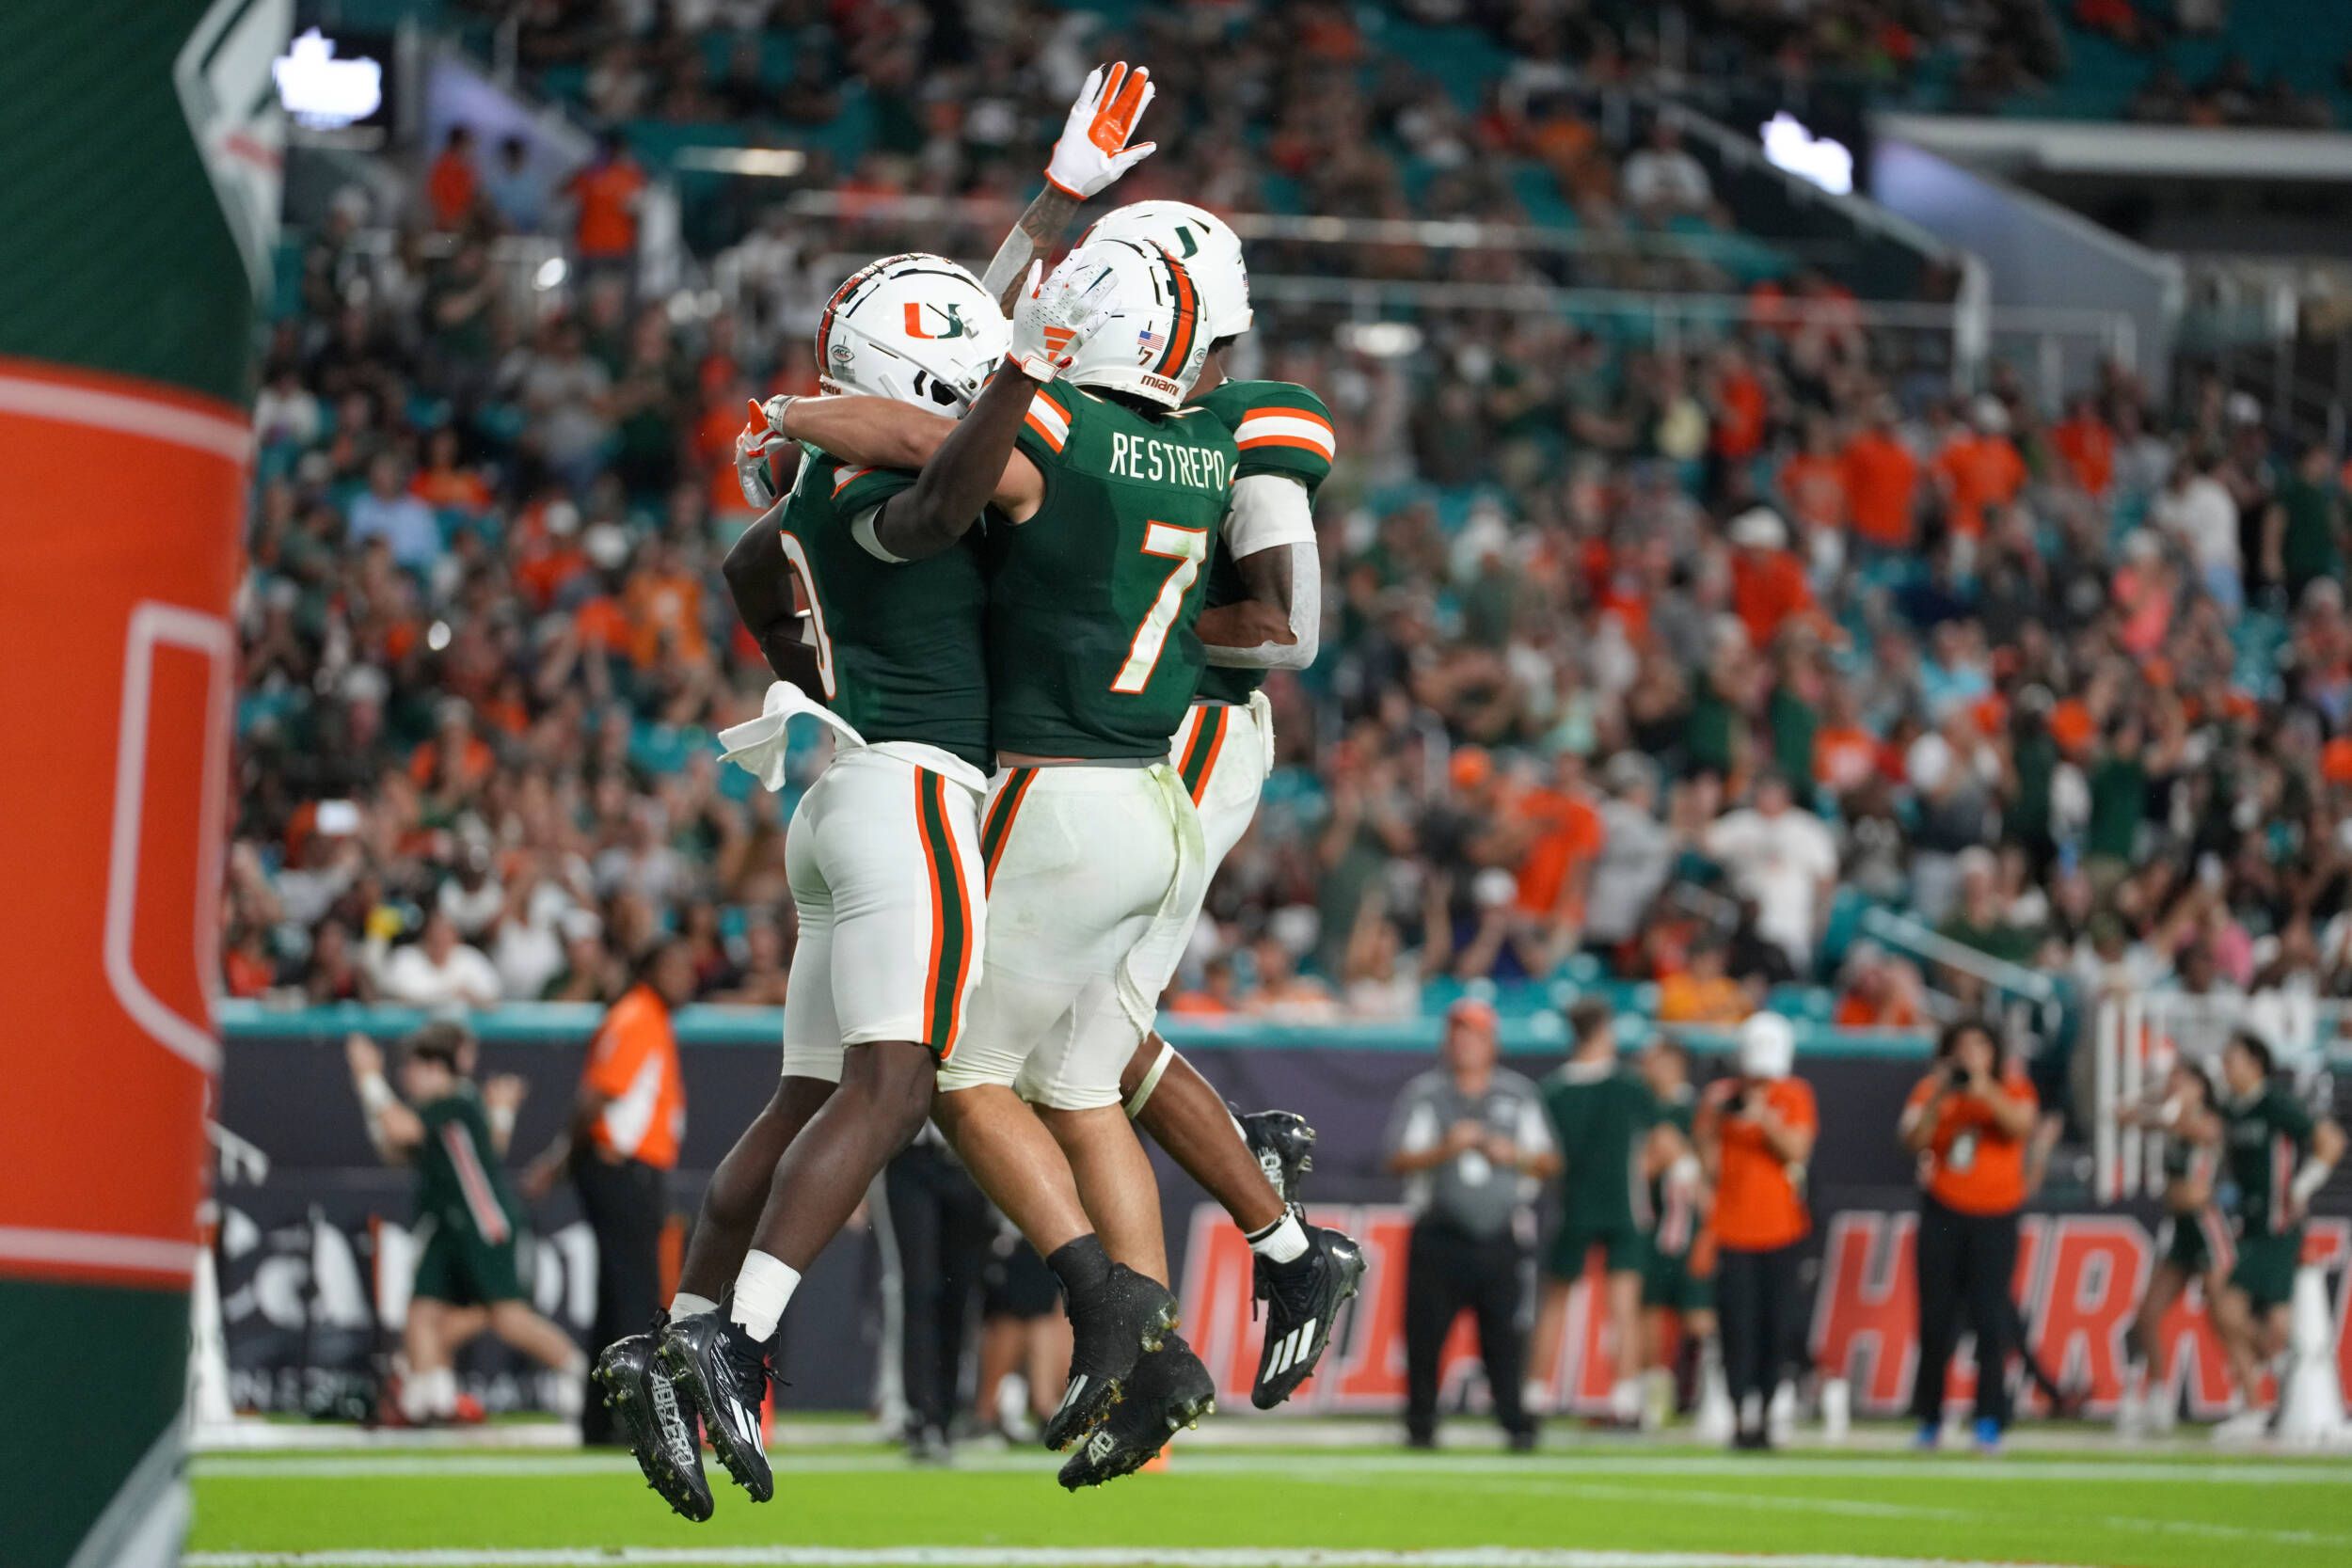 Hurricanes Players with the Most to Prove in the 2021 Season